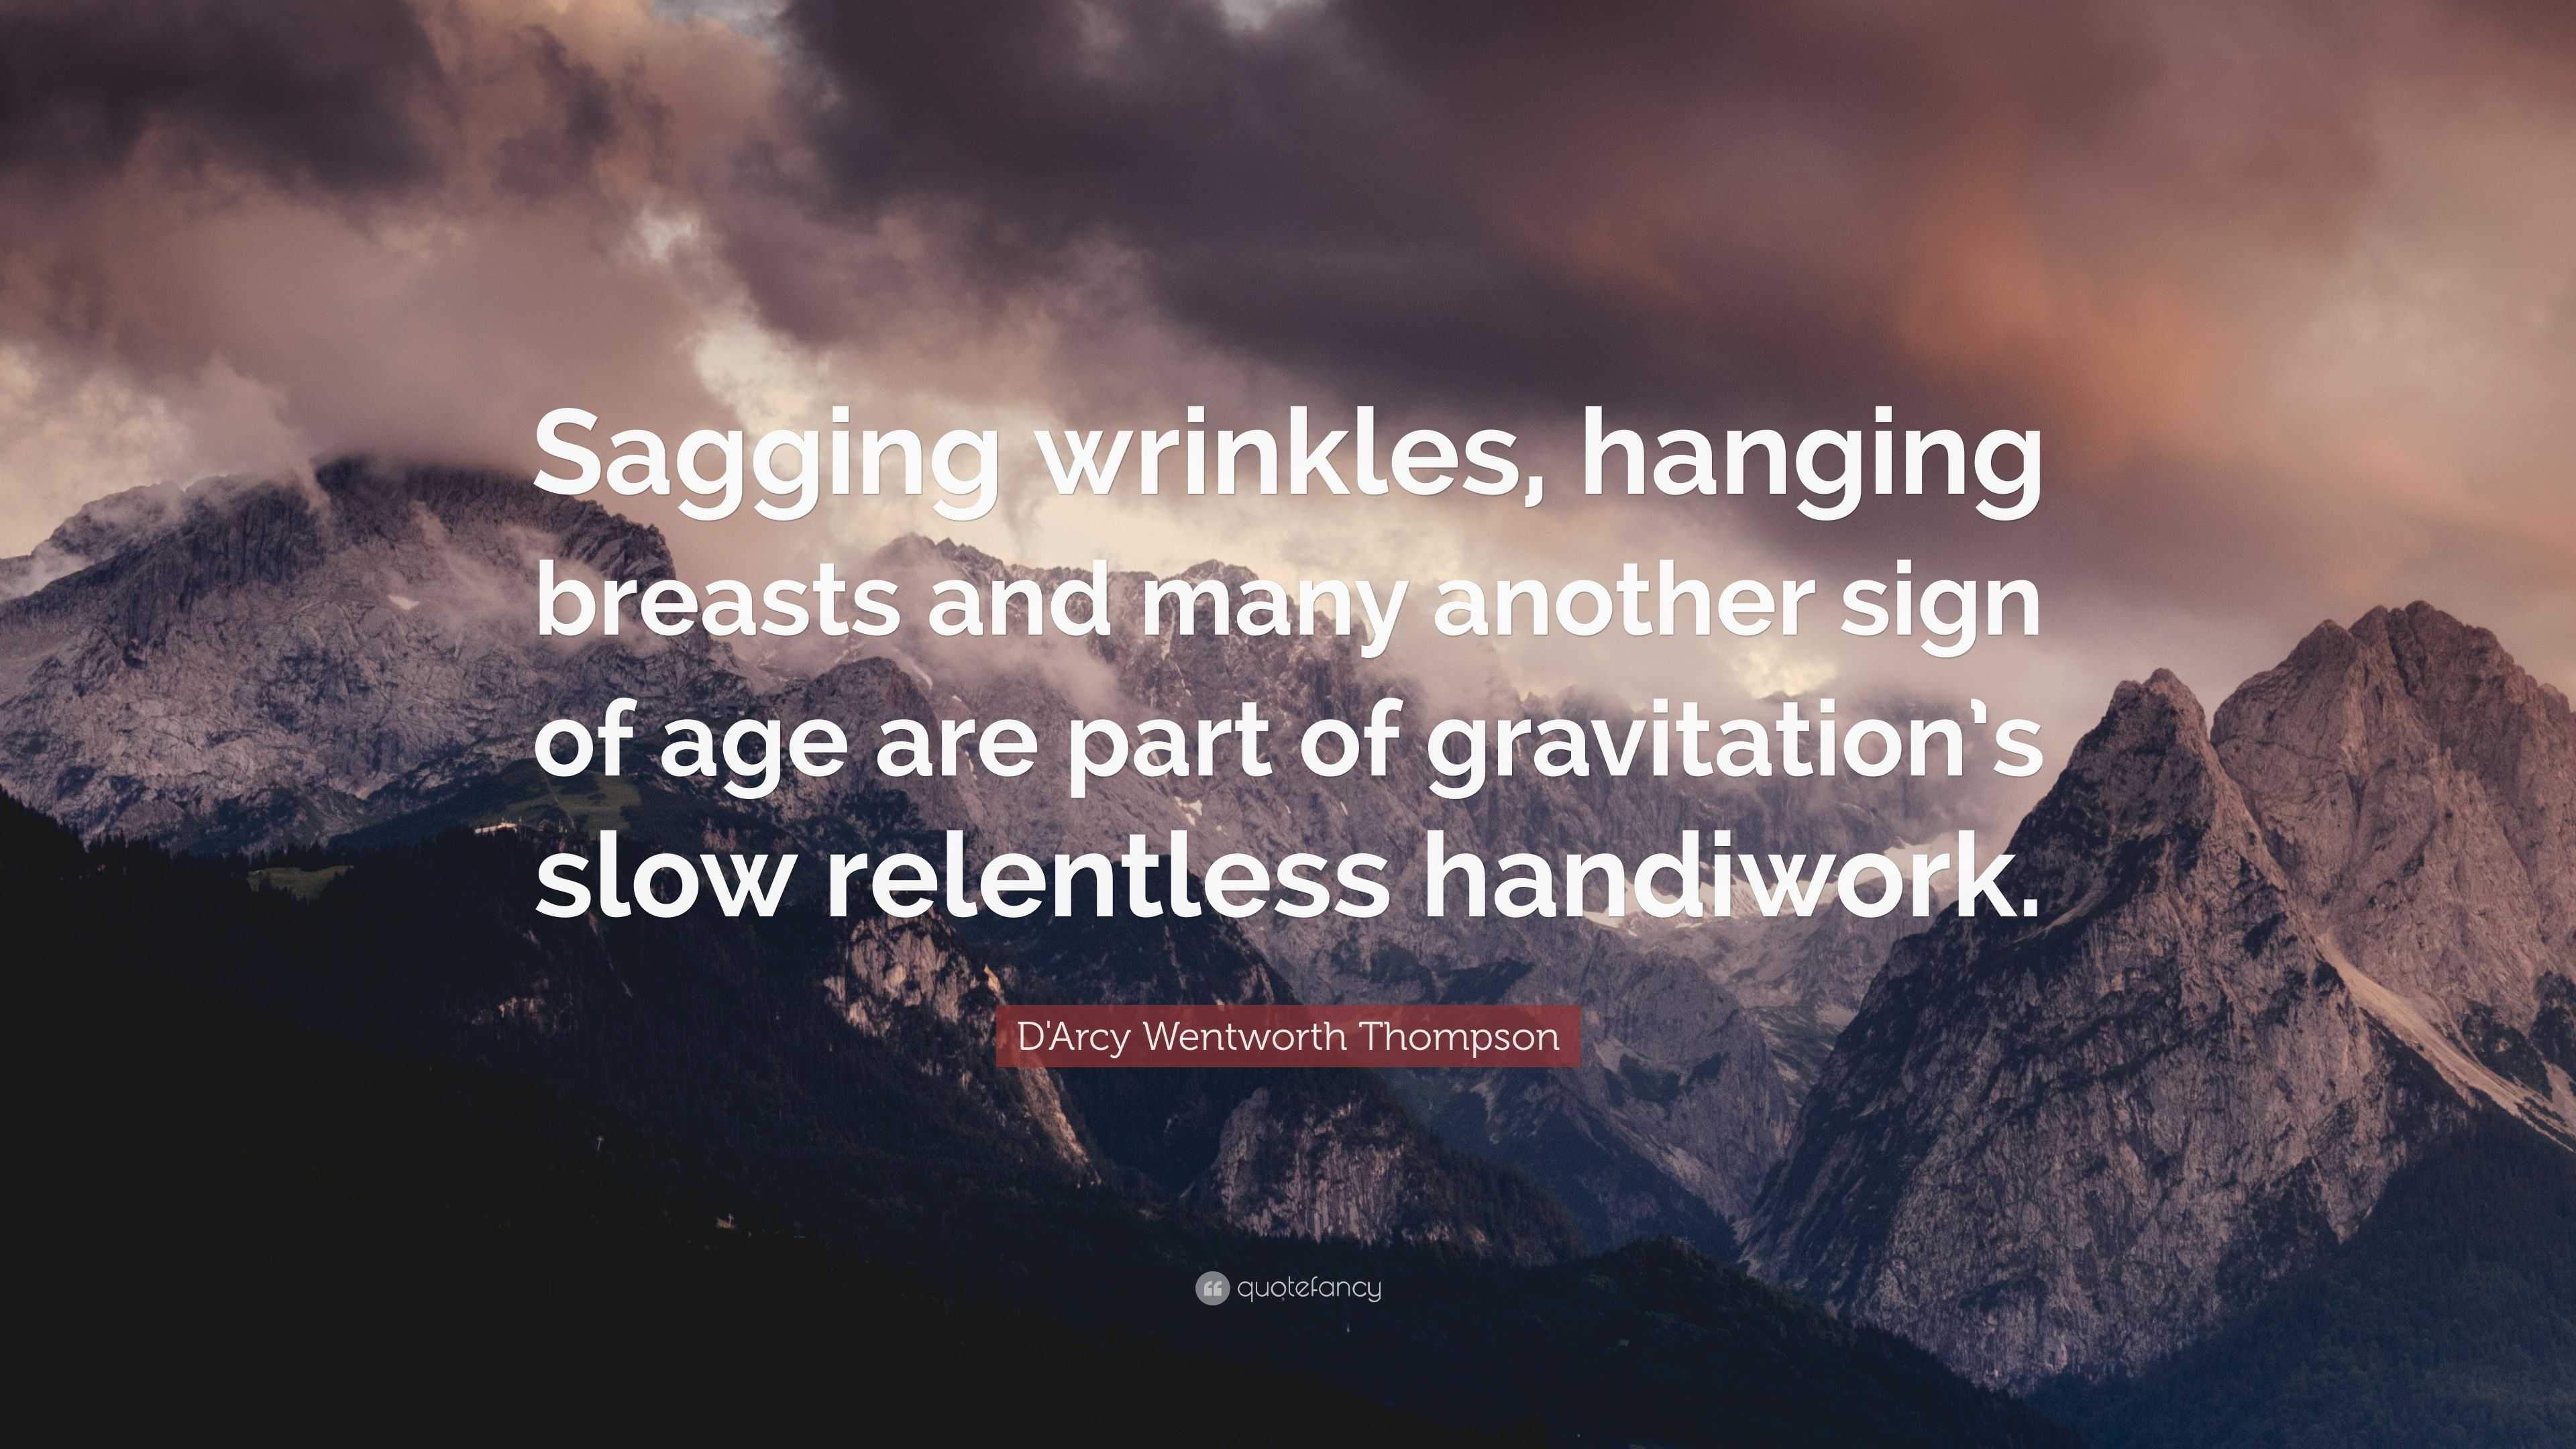 D'Arcy Wentworth Thompson Quote: “Sagging wrinkles, hanging